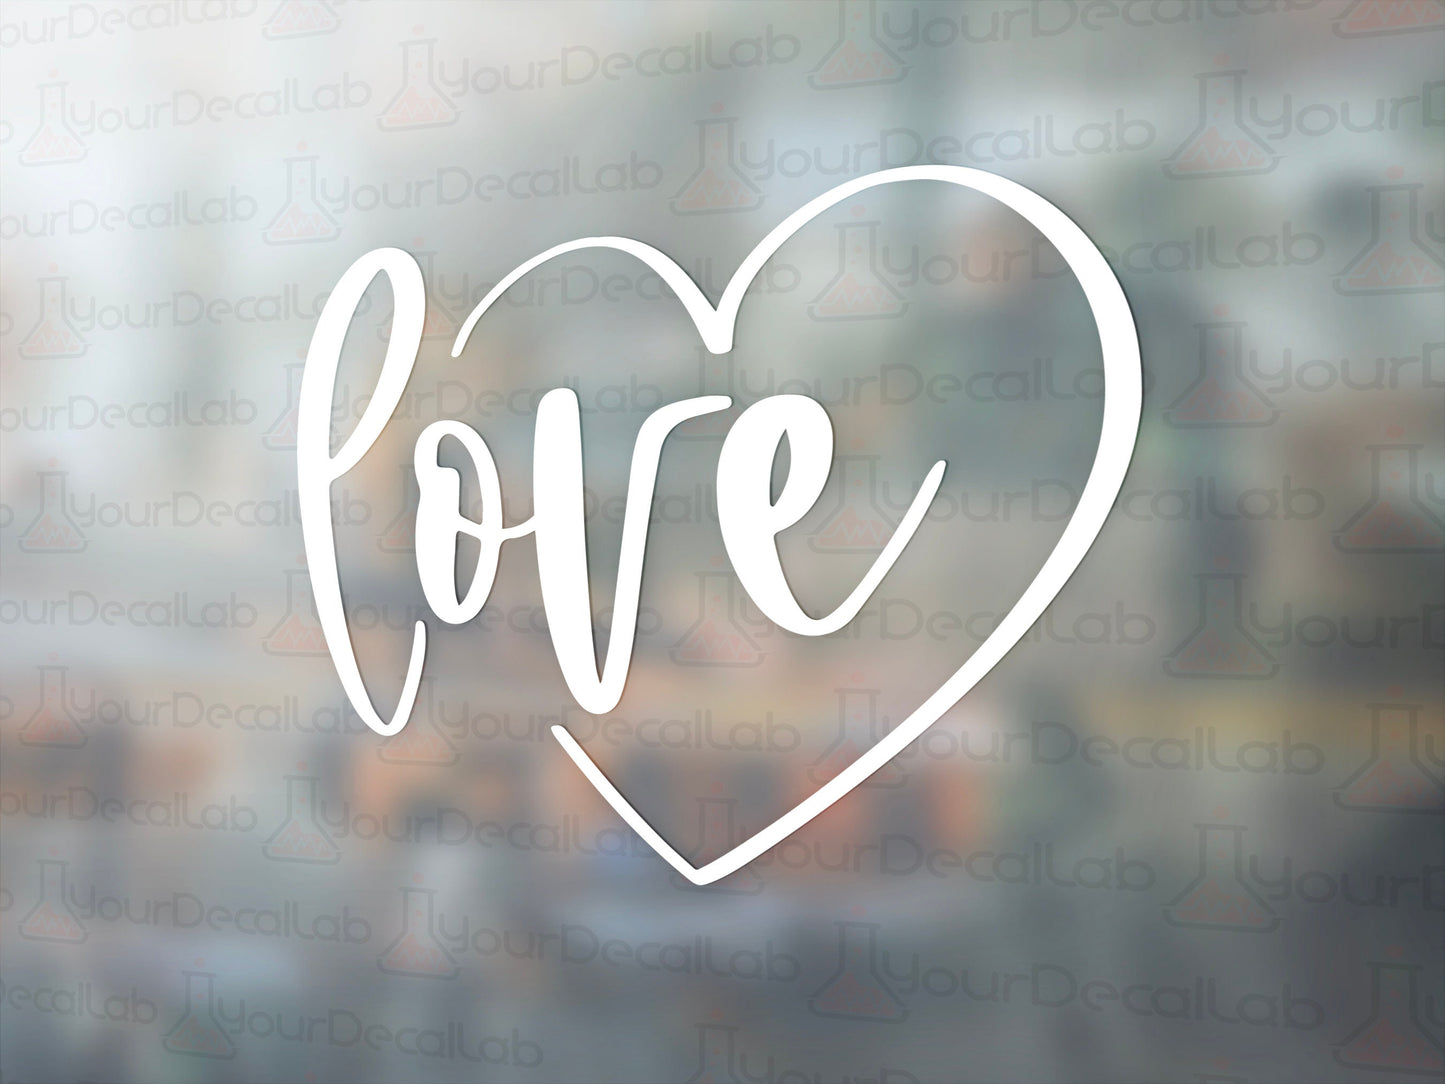 Love Decal - Many Colors & Sizes